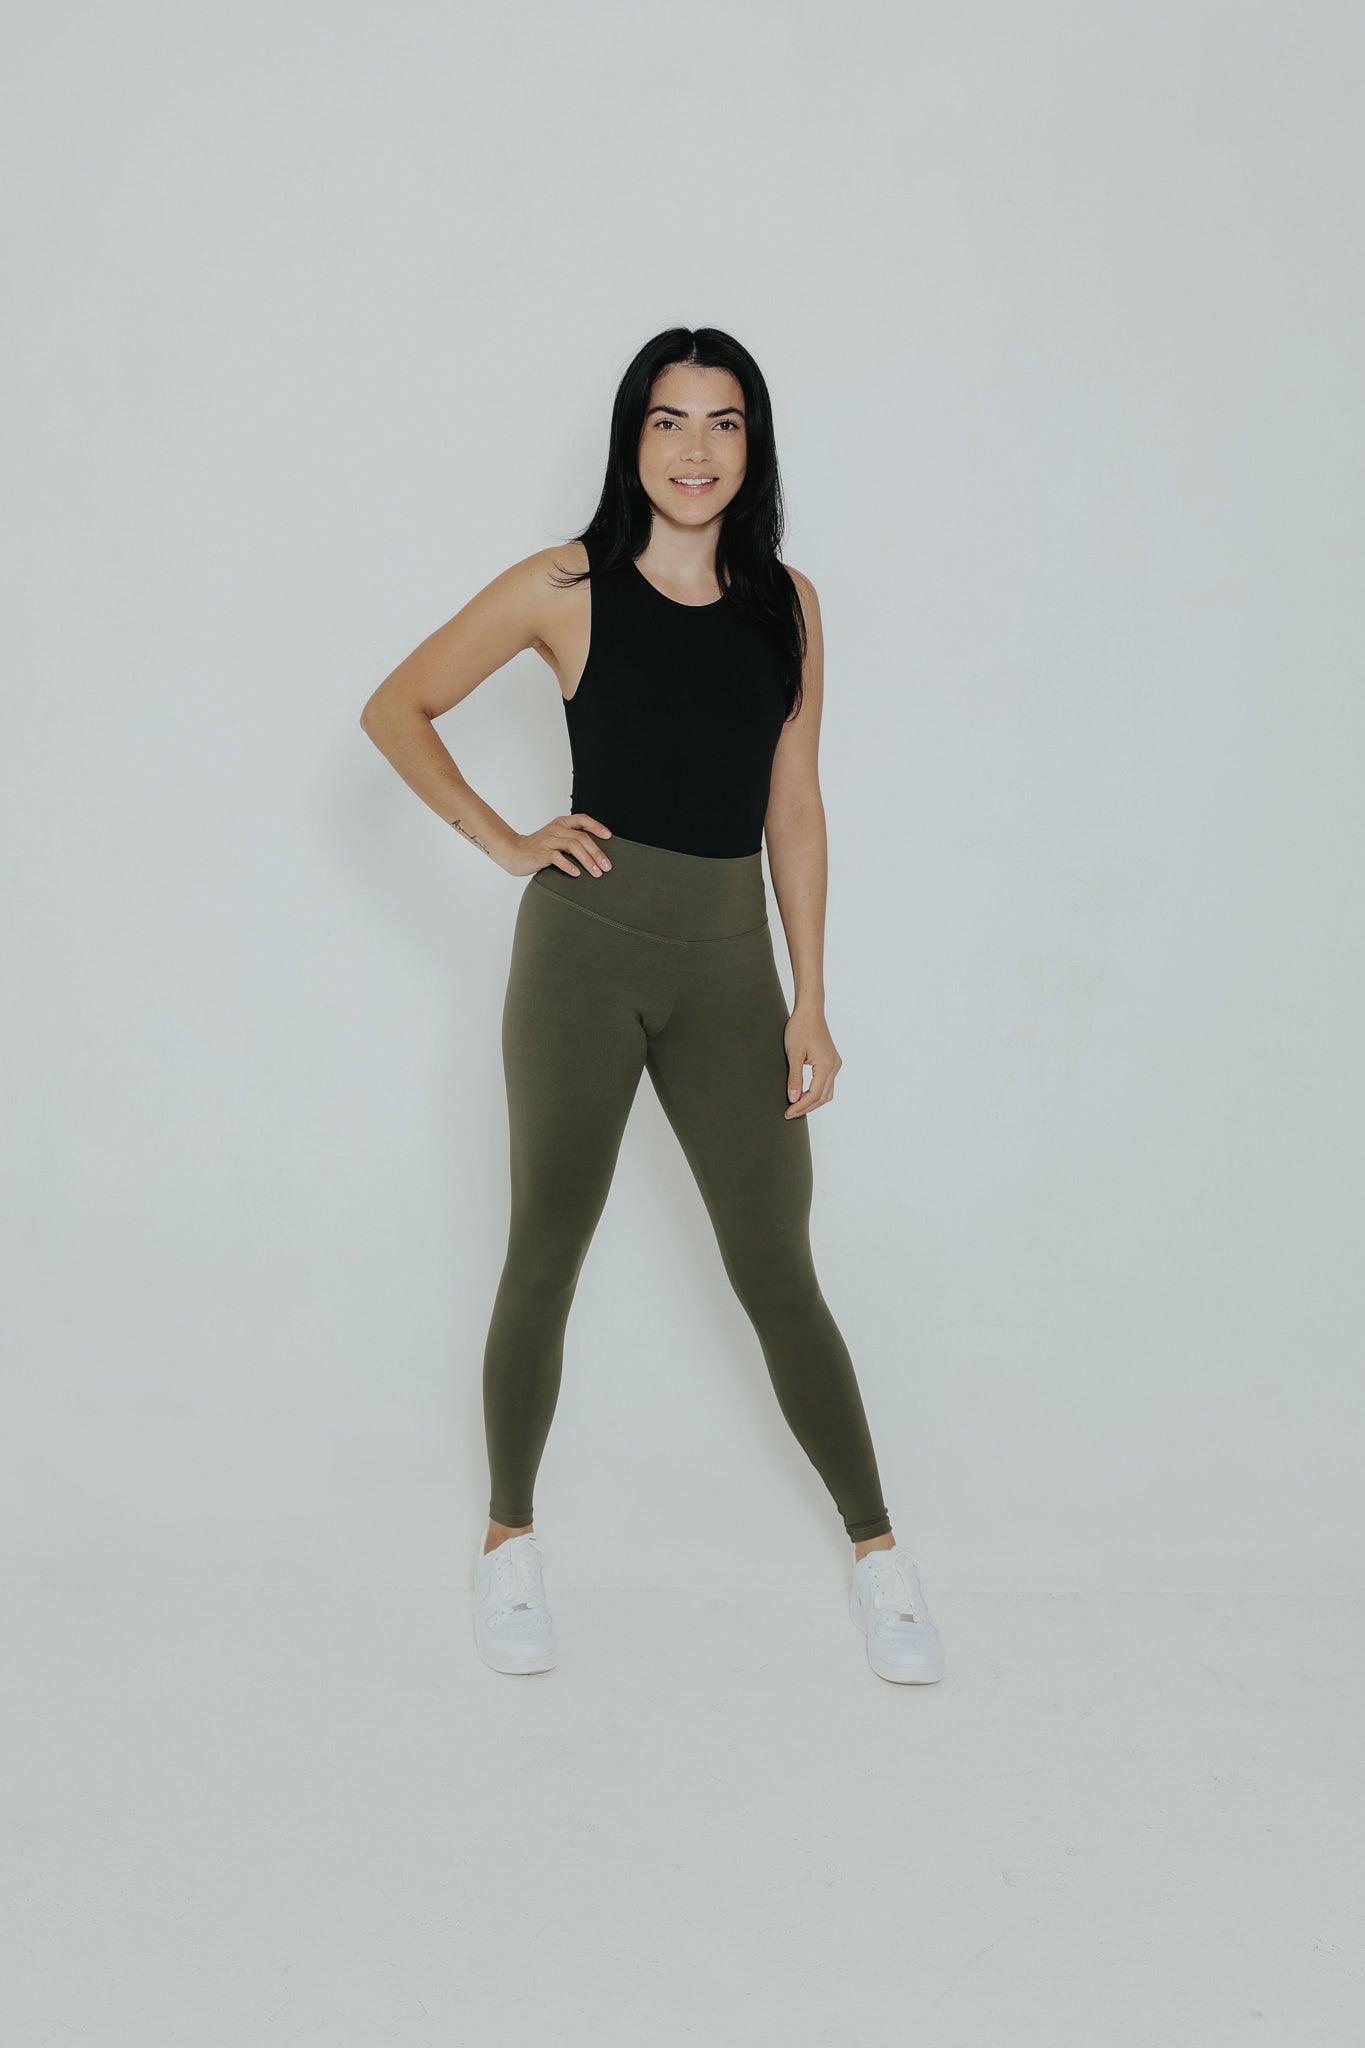 olive green legging outfit｜TikTok Search